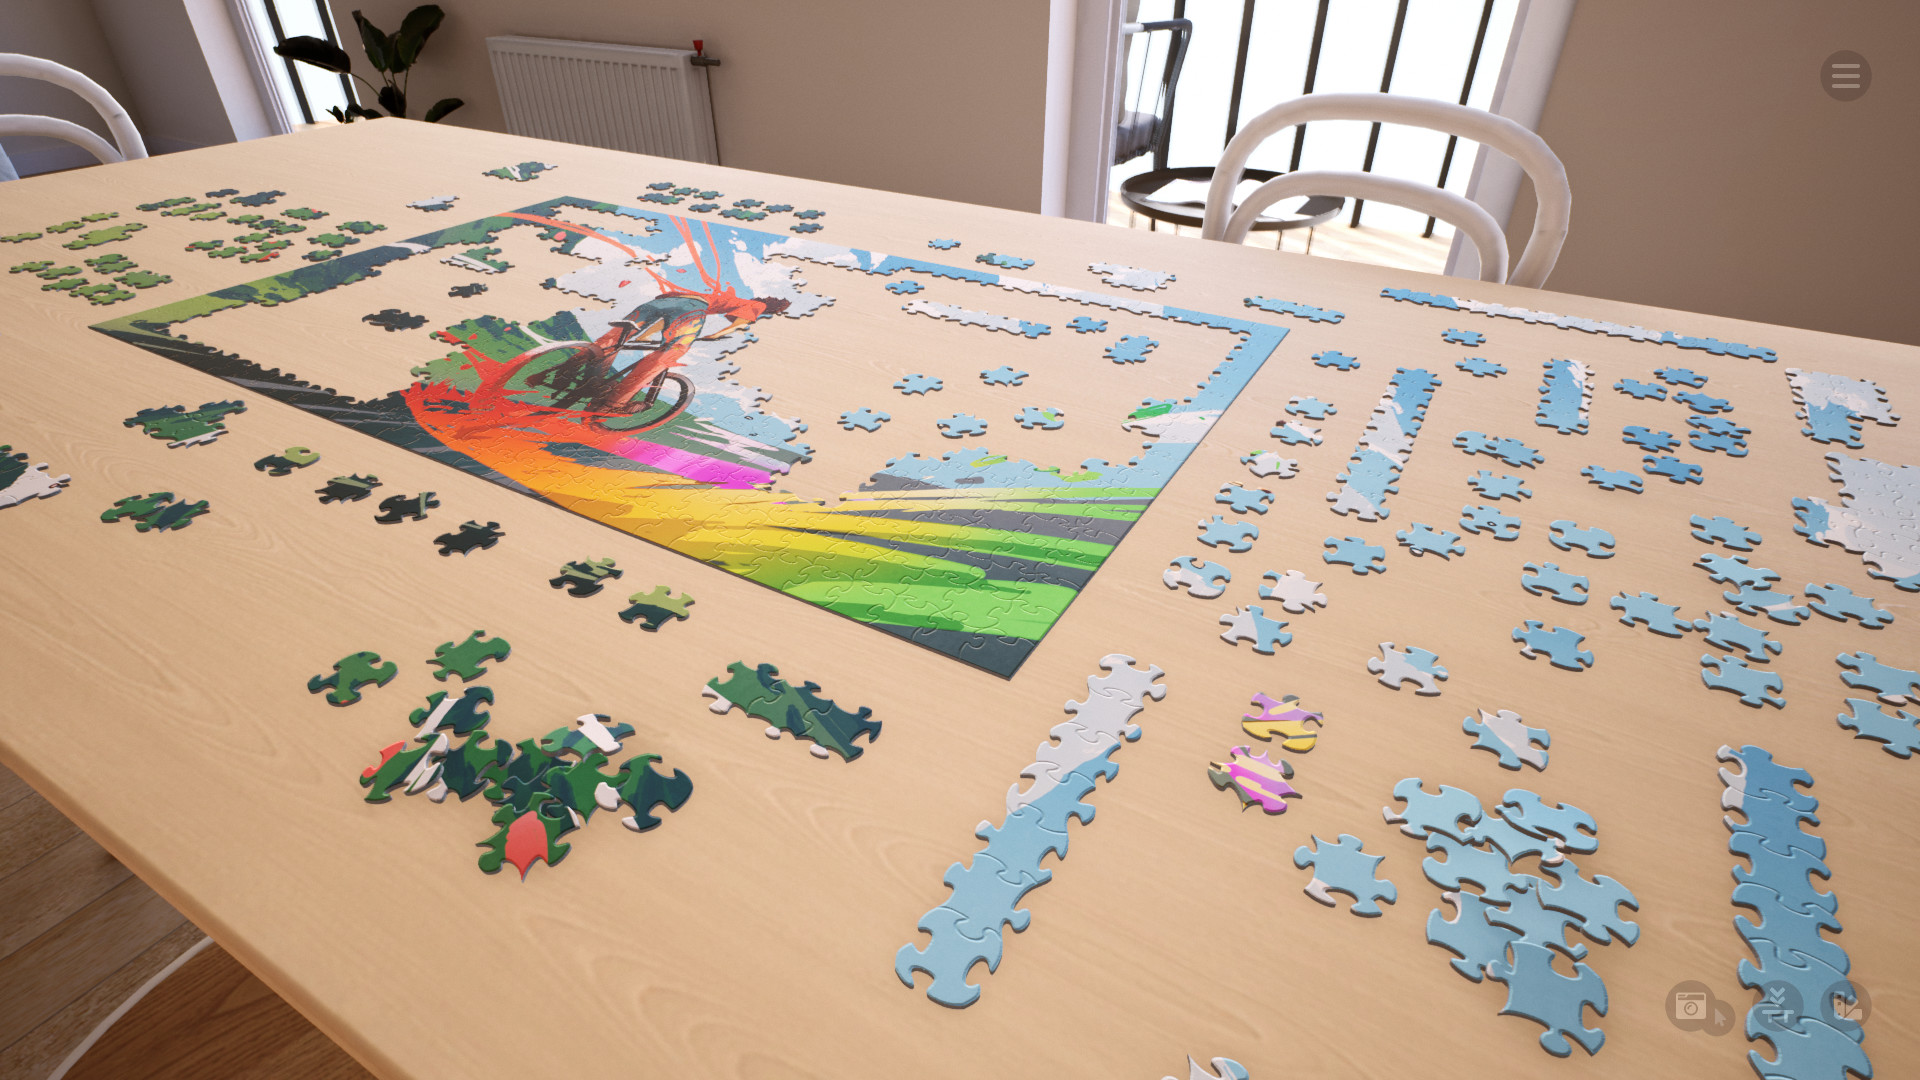 Puzzle Together Multiplayer Jigsaw Puzzles no Steam